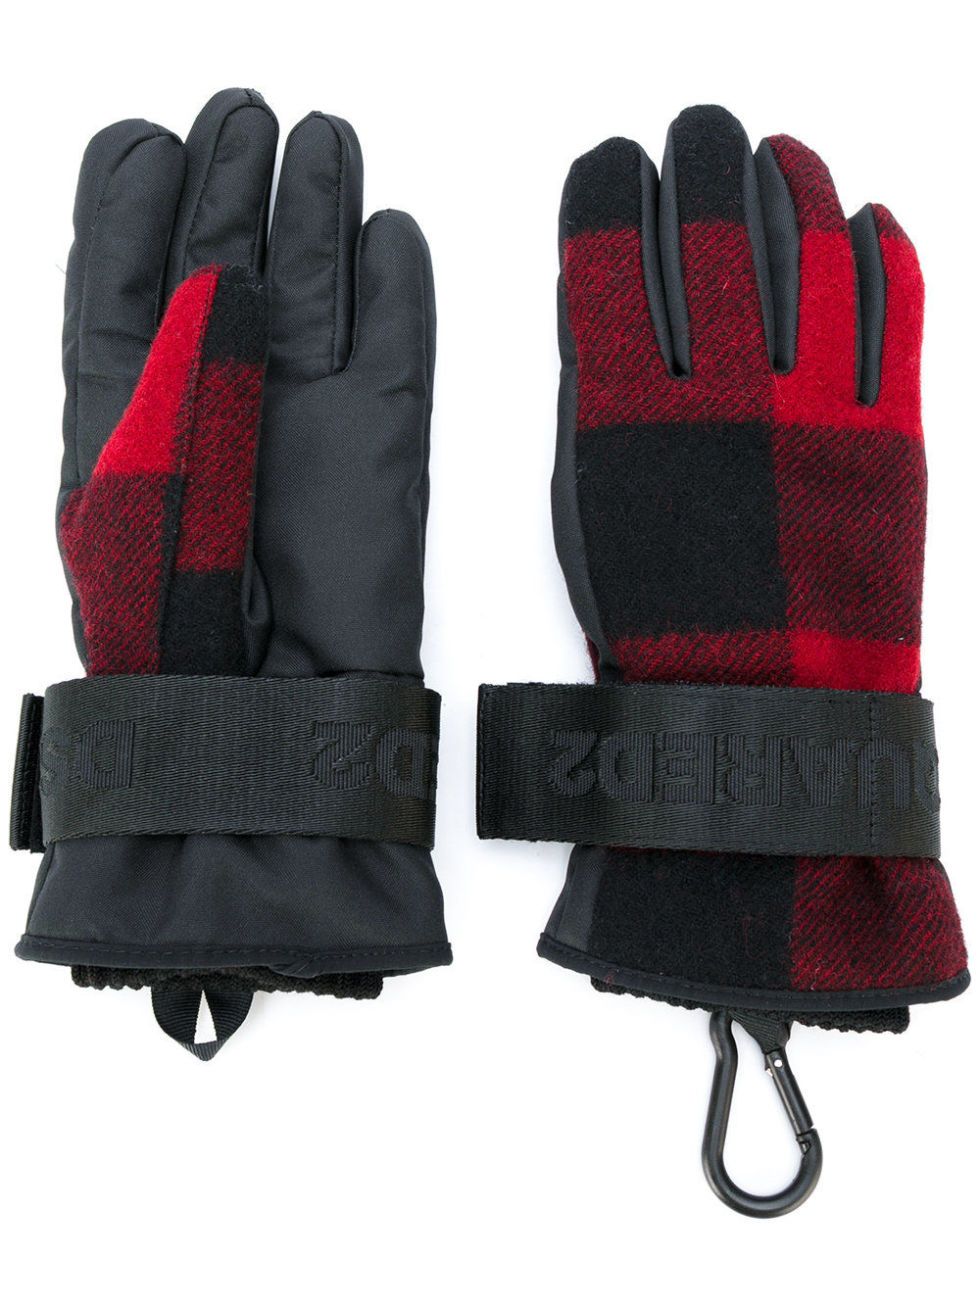 Glove, Personal protective equipment, Safety glove, Sports gear, Red, Bicycle glove, Fashion accessory, Hand, Fur, Wool, 